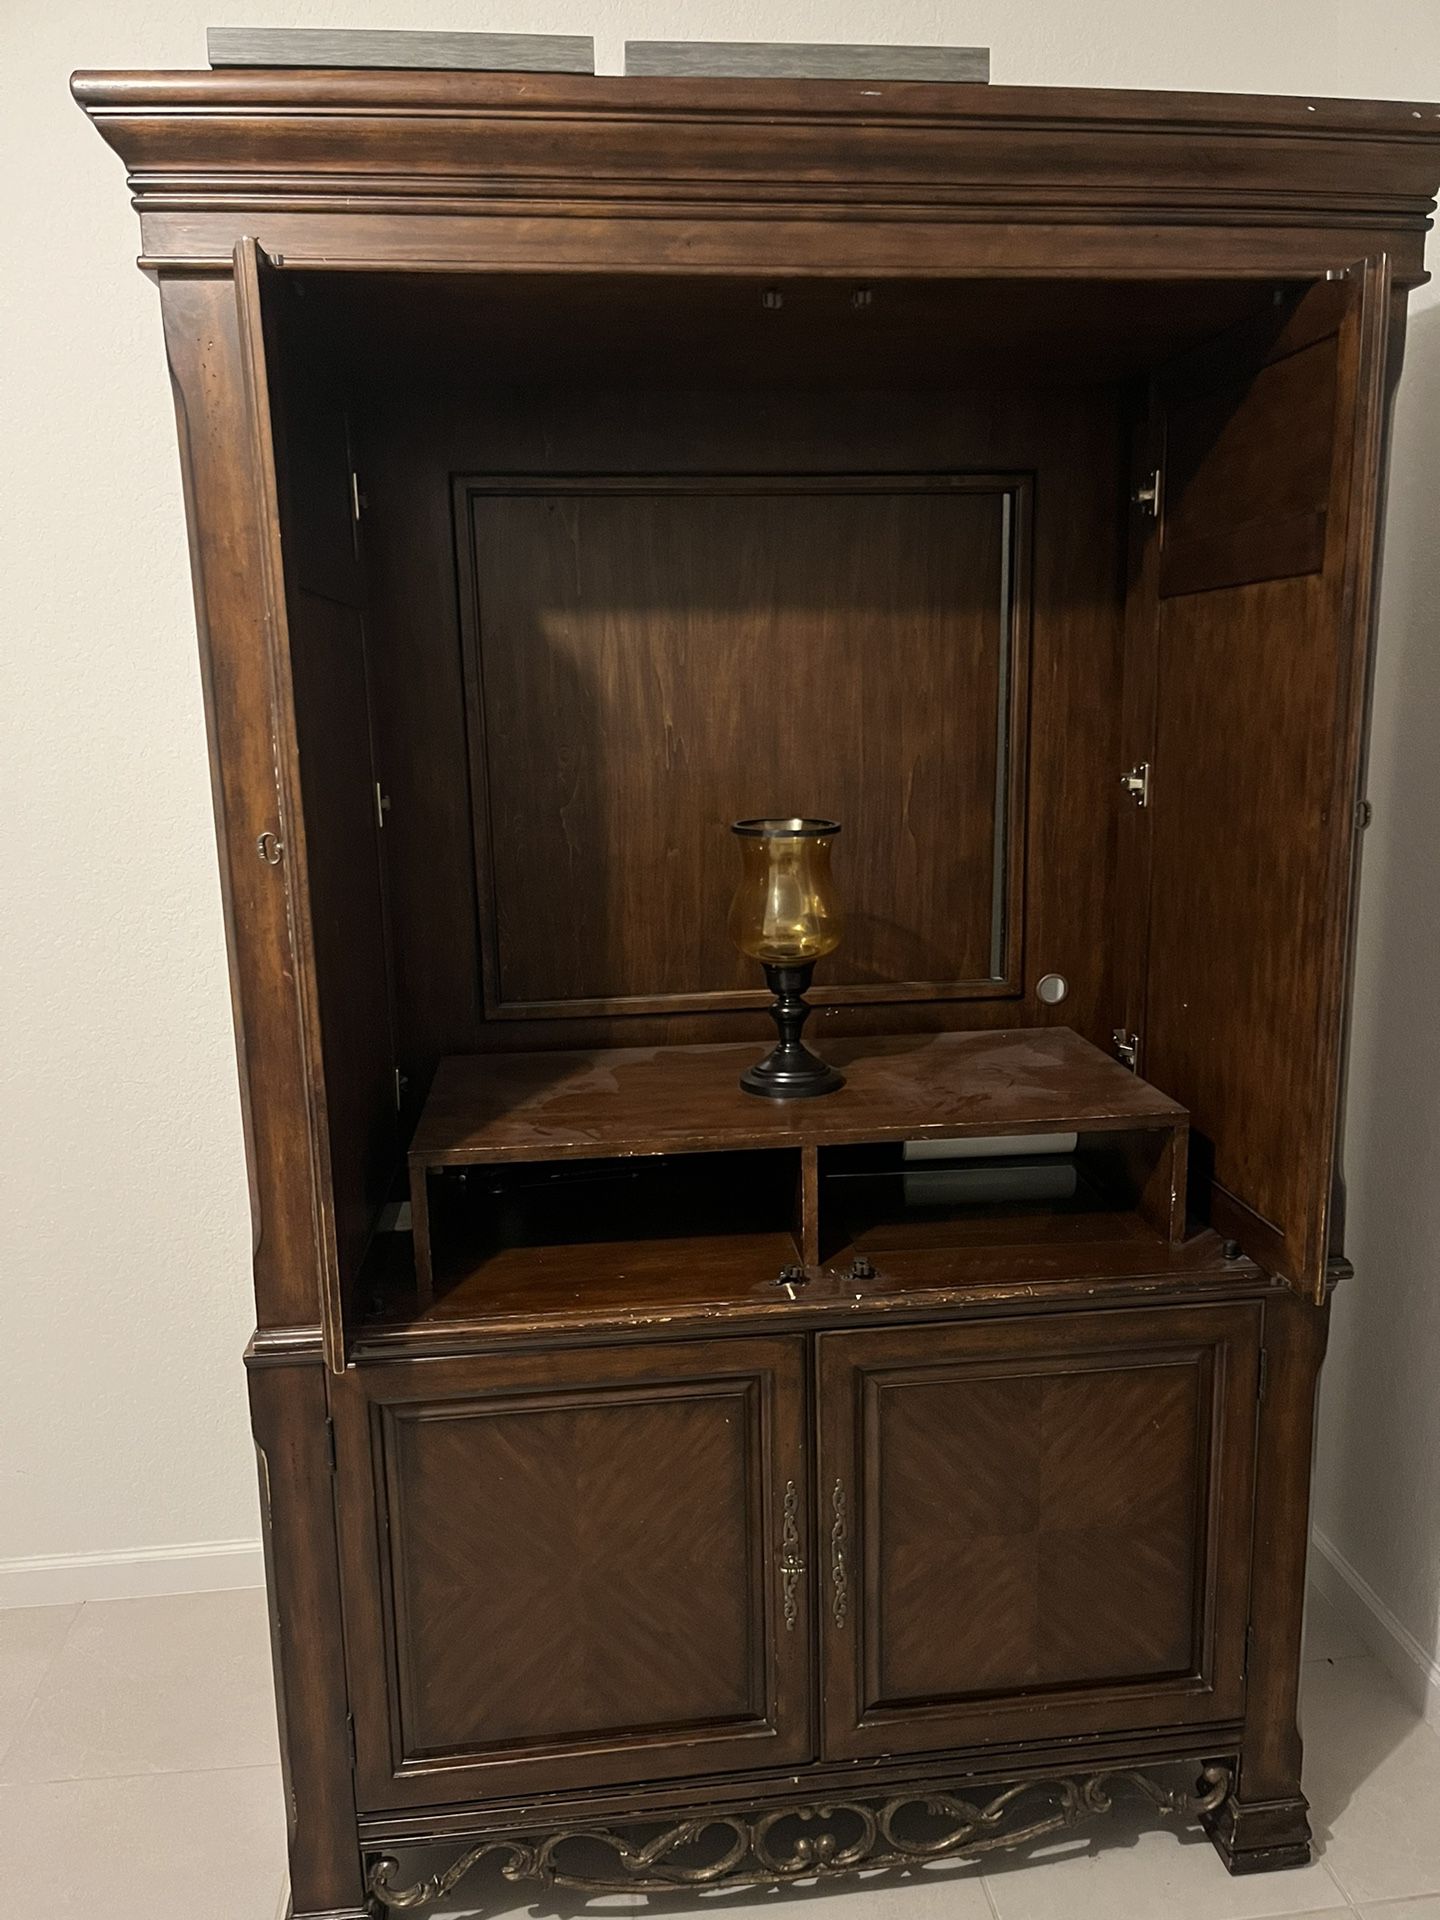 Large armoire 